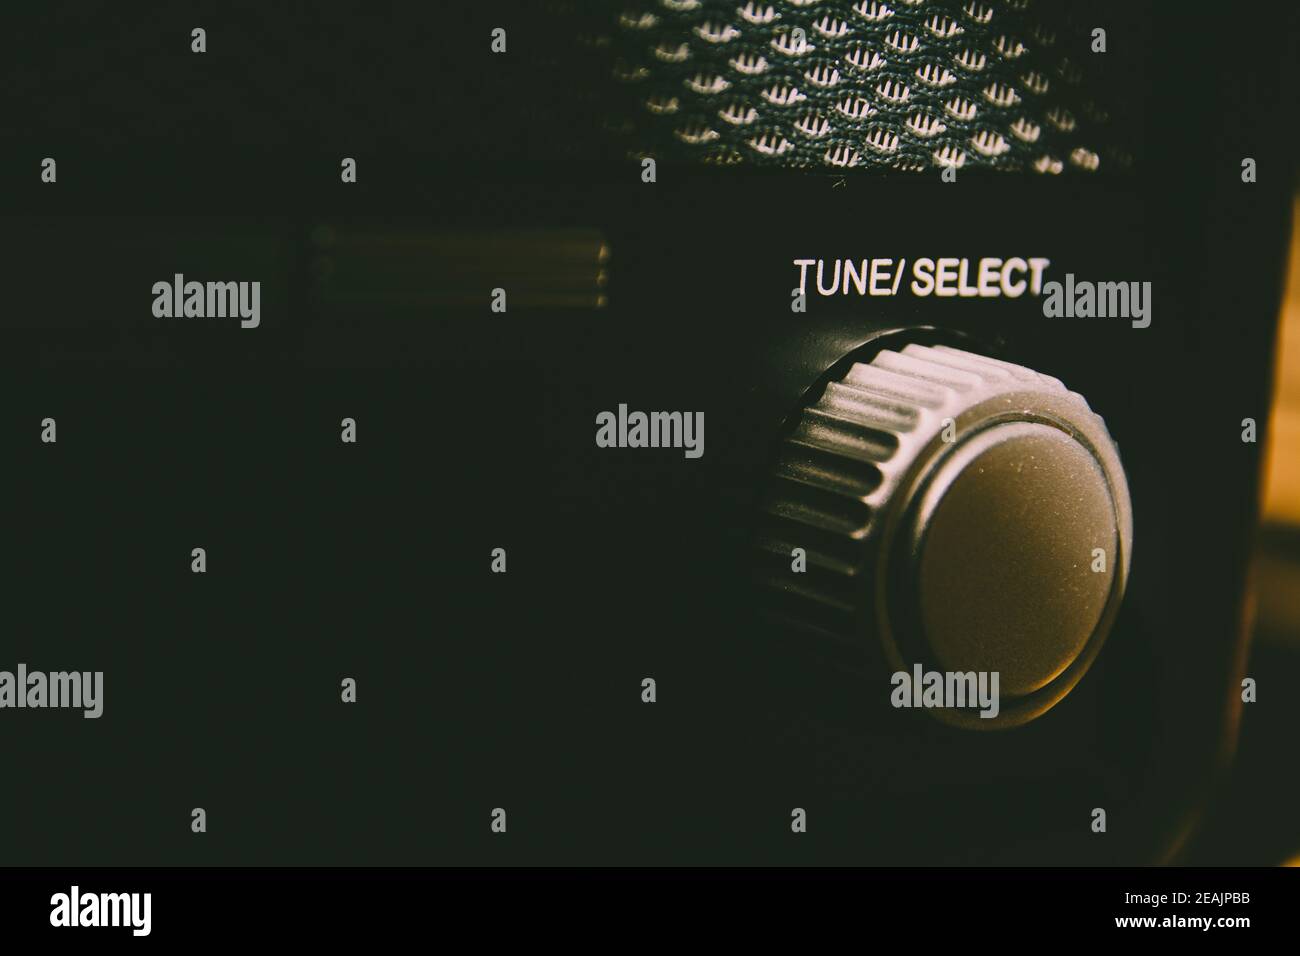 Tune Select button on a vintage and retro analogue radio. Stock Photo